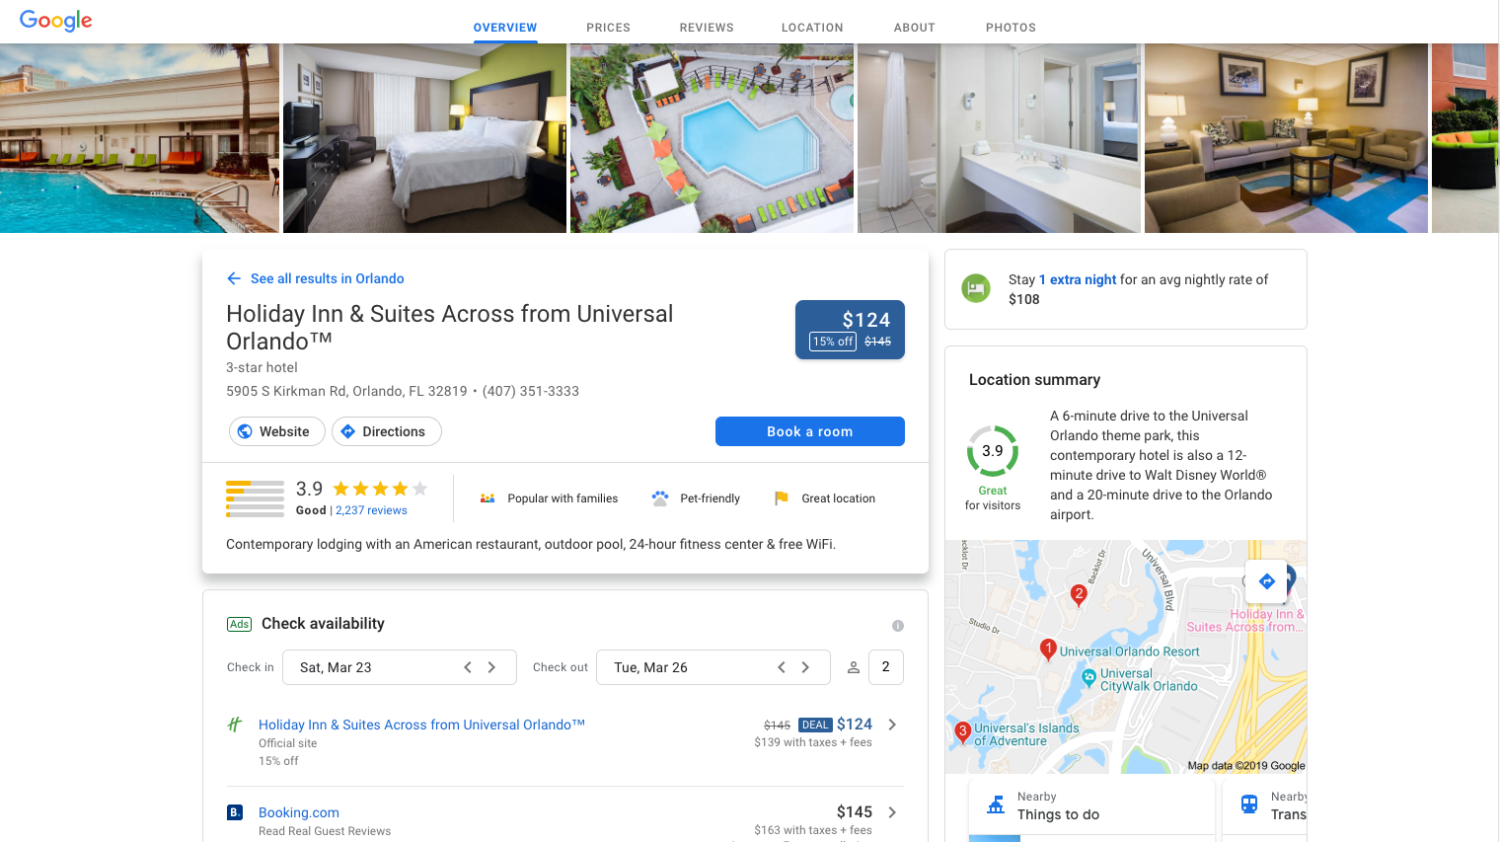 Google Hotel Overview